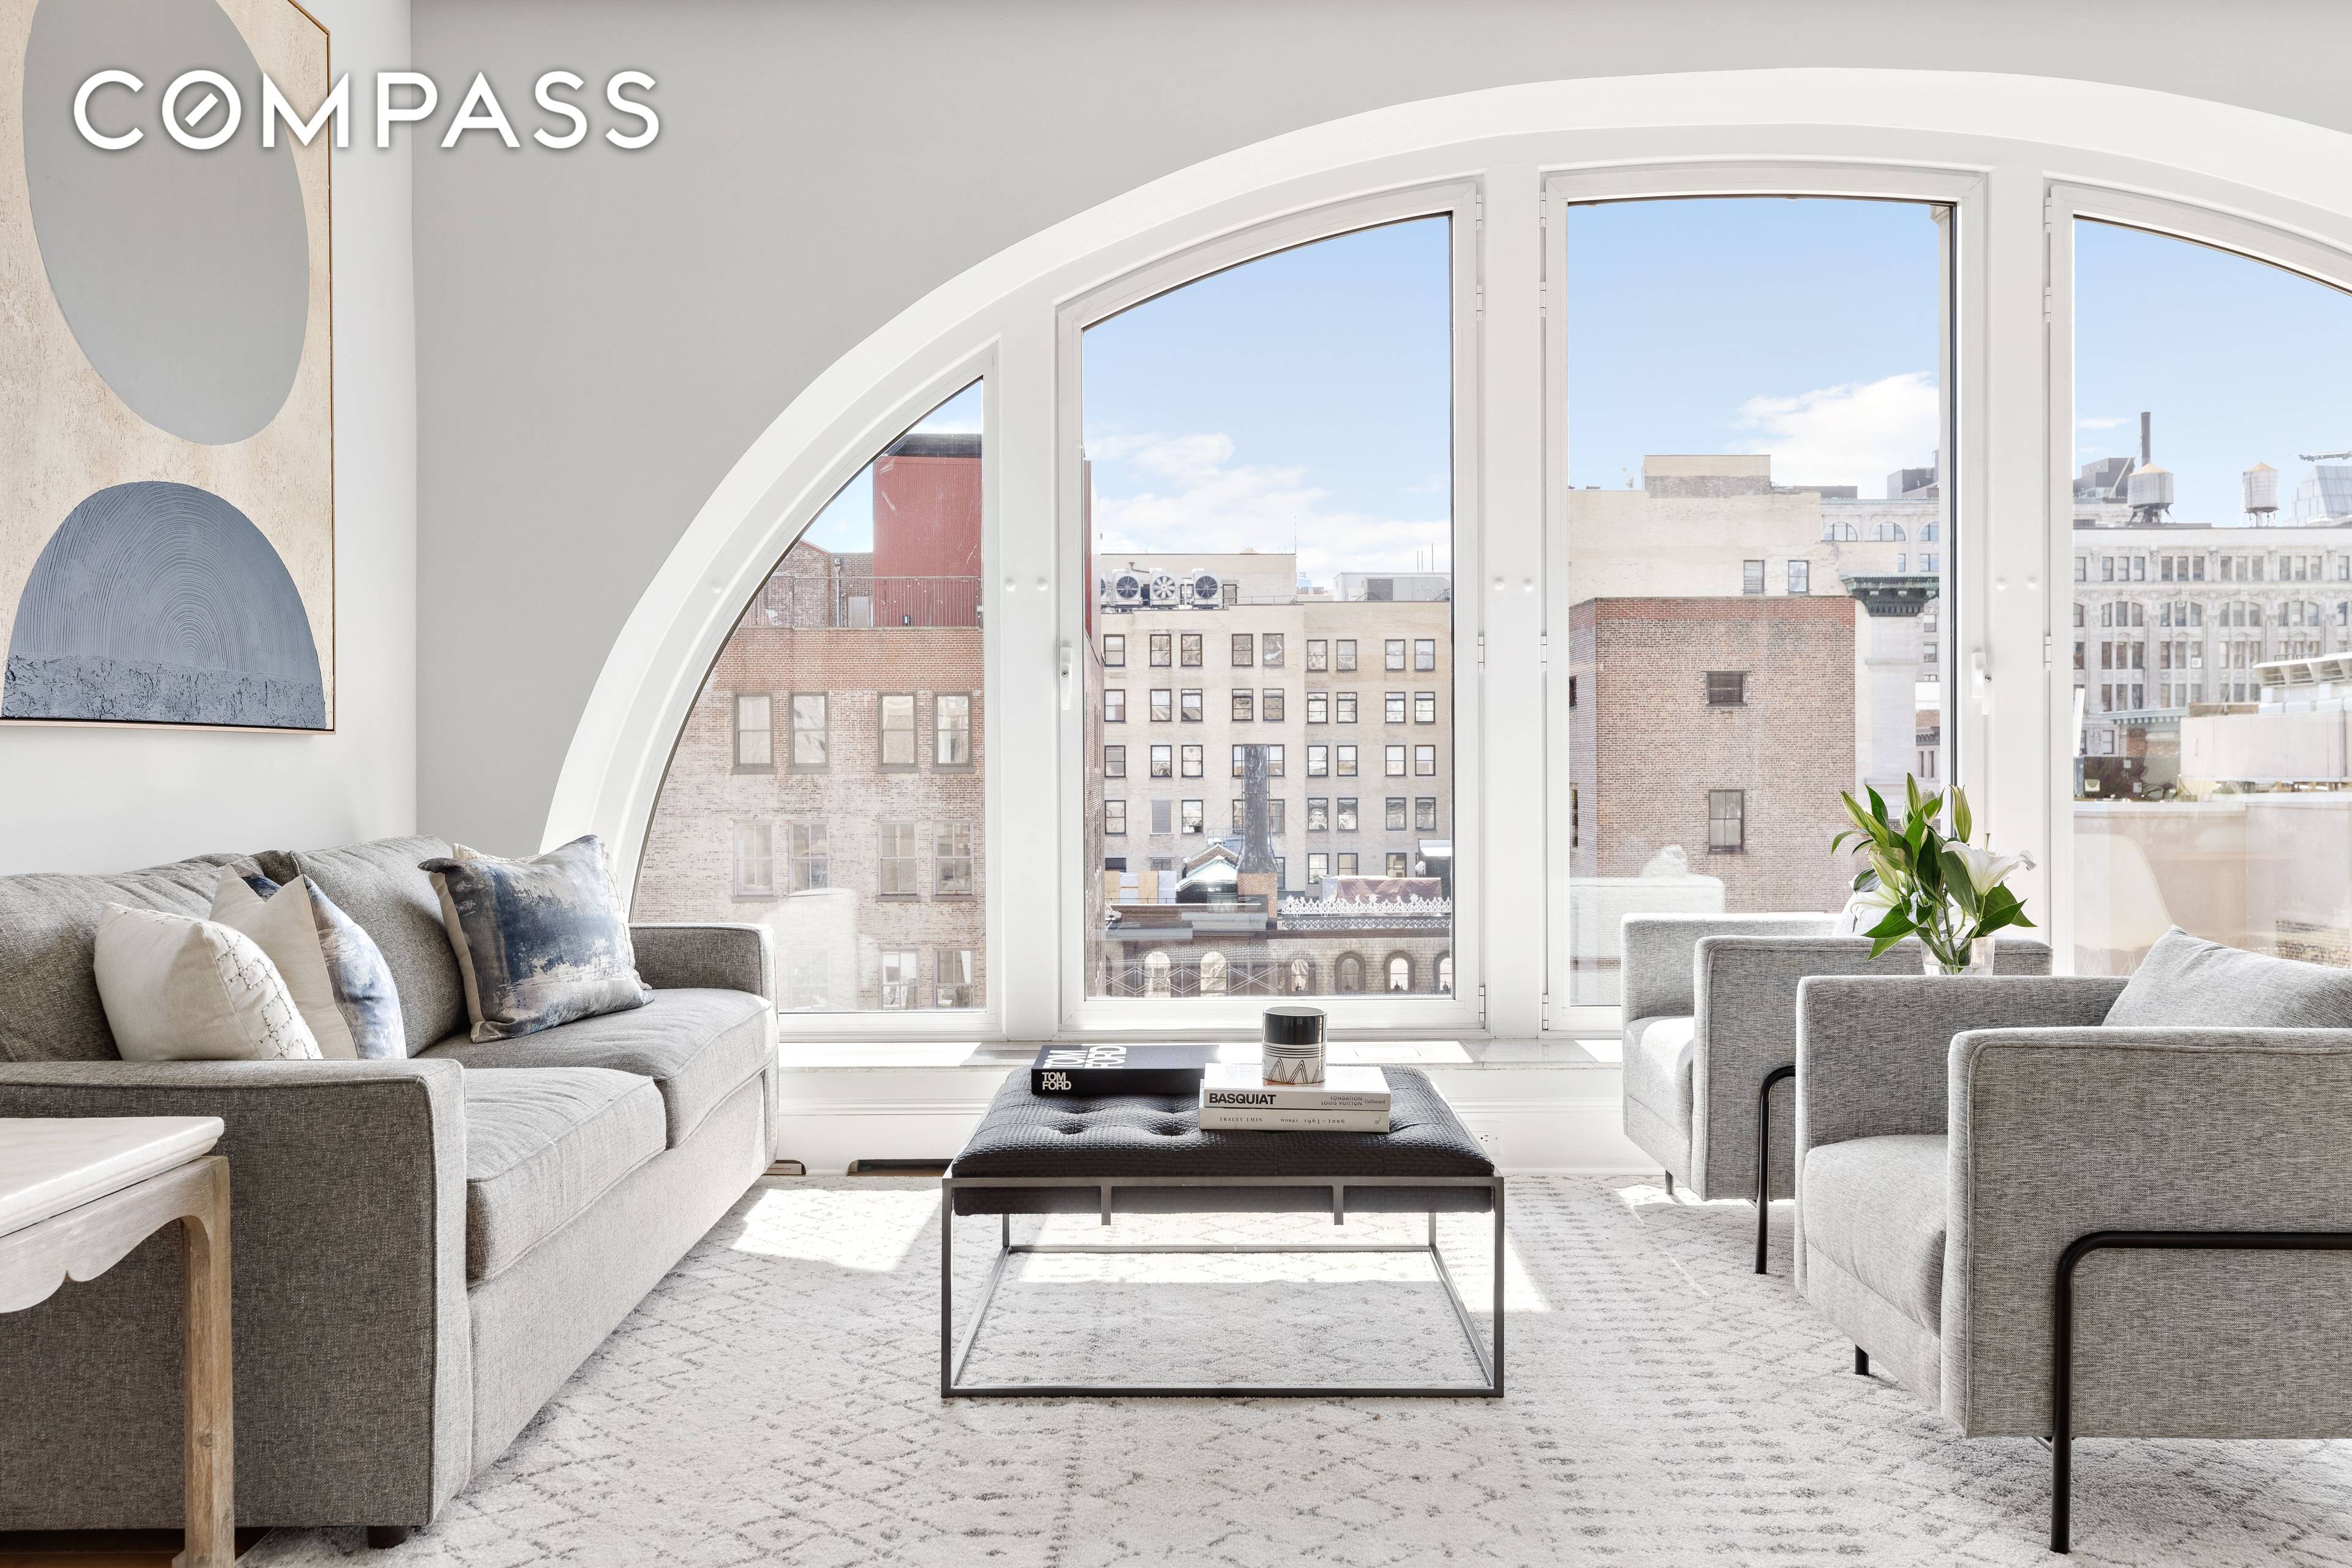 Make your summer outdoor entertaining dreams a reality in this sprawling, sun splashed penthouse duplex condominium featuring dramatic interiors and a massive, landscaped terrace in the perfect Flatiron District location.